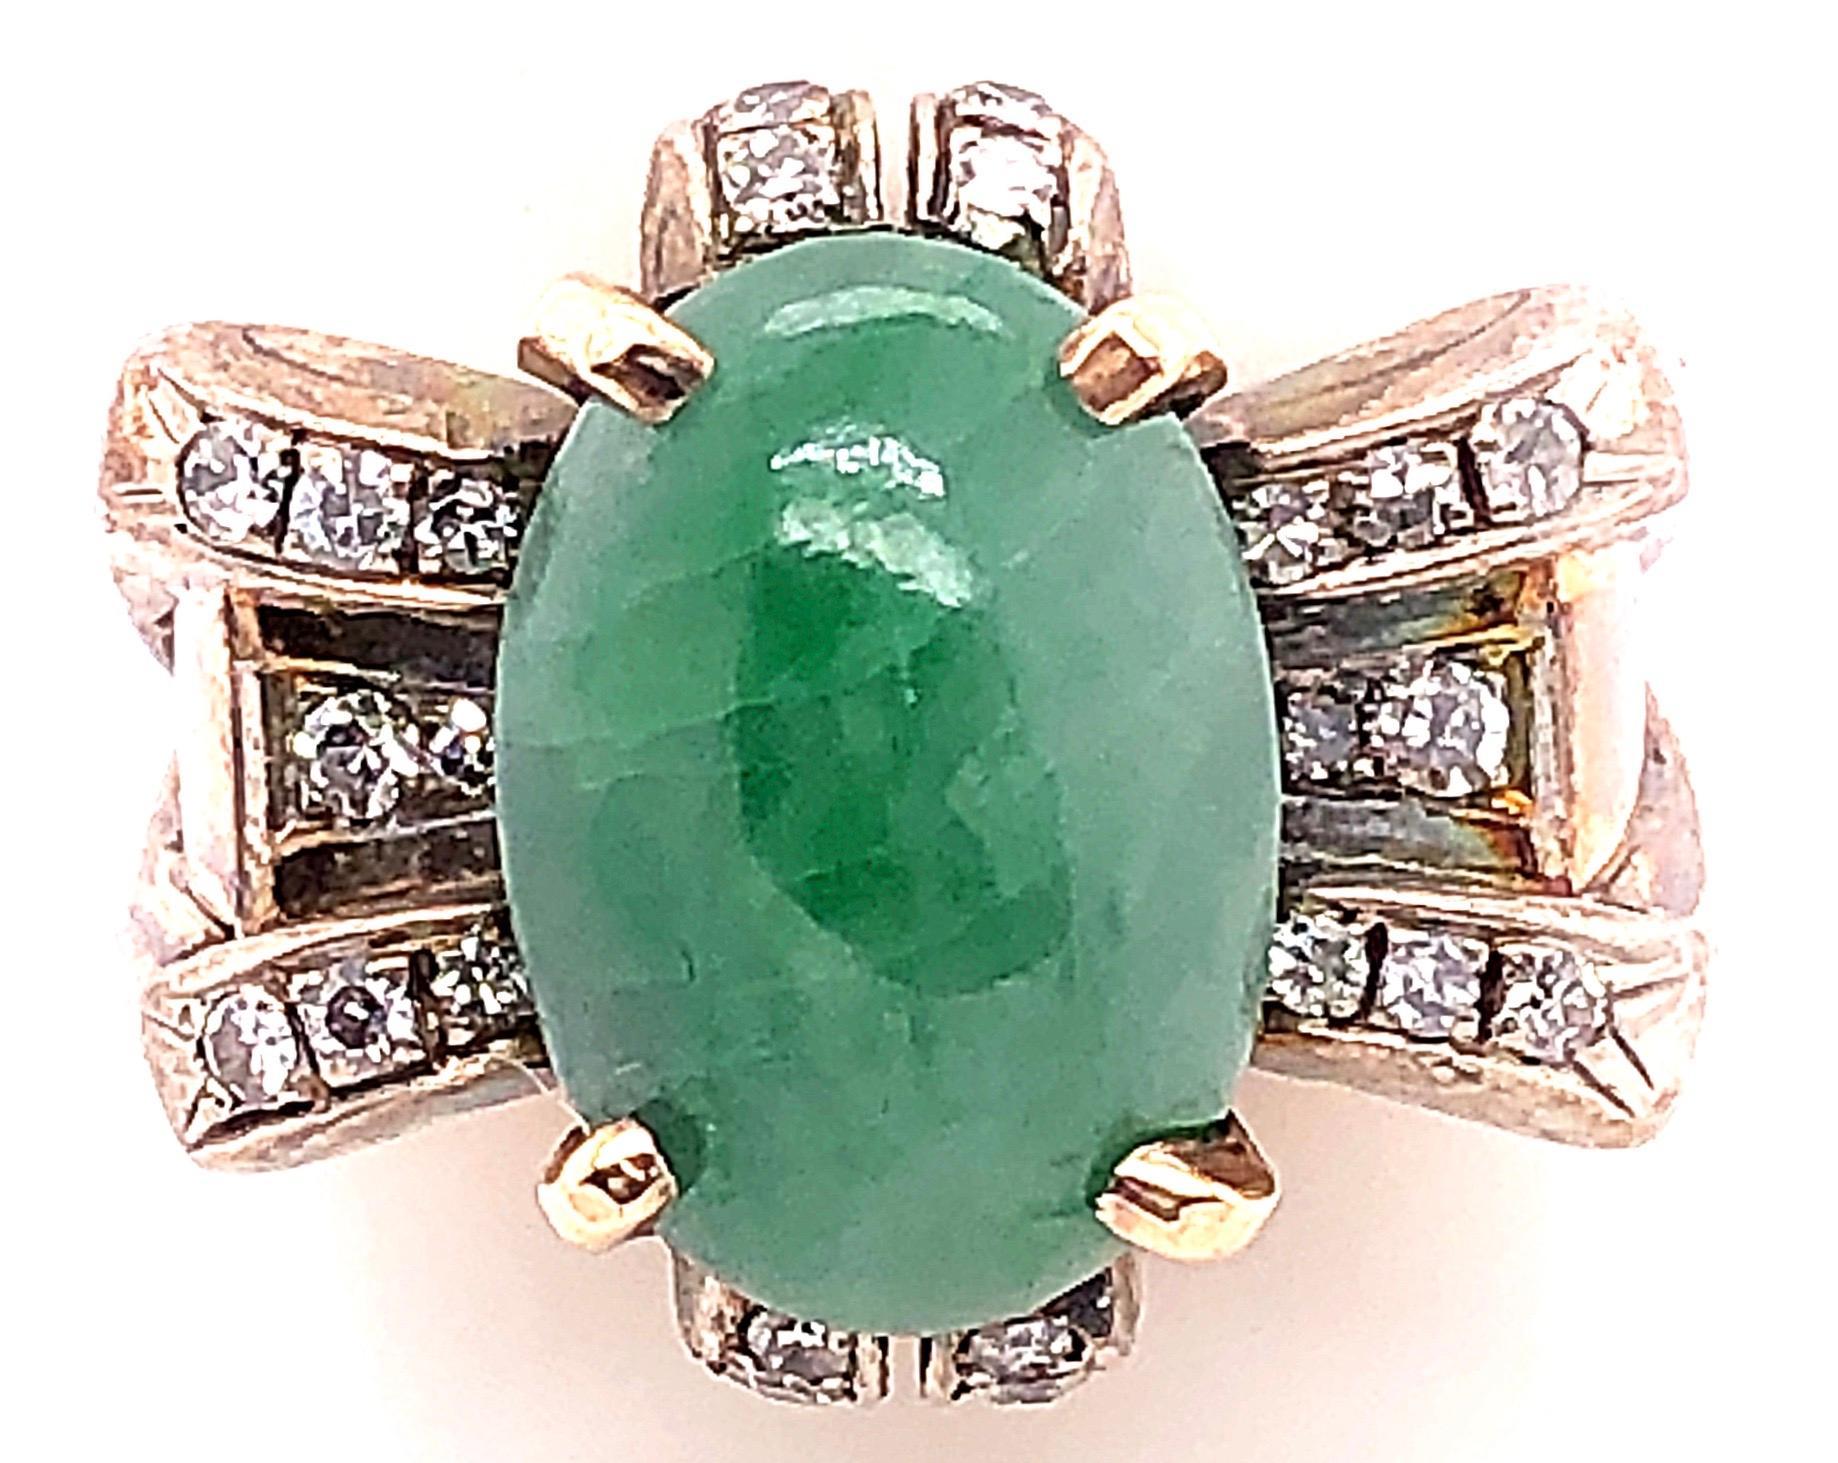 18 Karat Yellow Gold Oval Jade Solitaire Ring with Diamond Accents
24 piece diamonds with 0.25 total diamond weight.
Size 9
9.50 grams total weight.
Height: 20 mm
Width: 20 mm
Depth: 5 mm